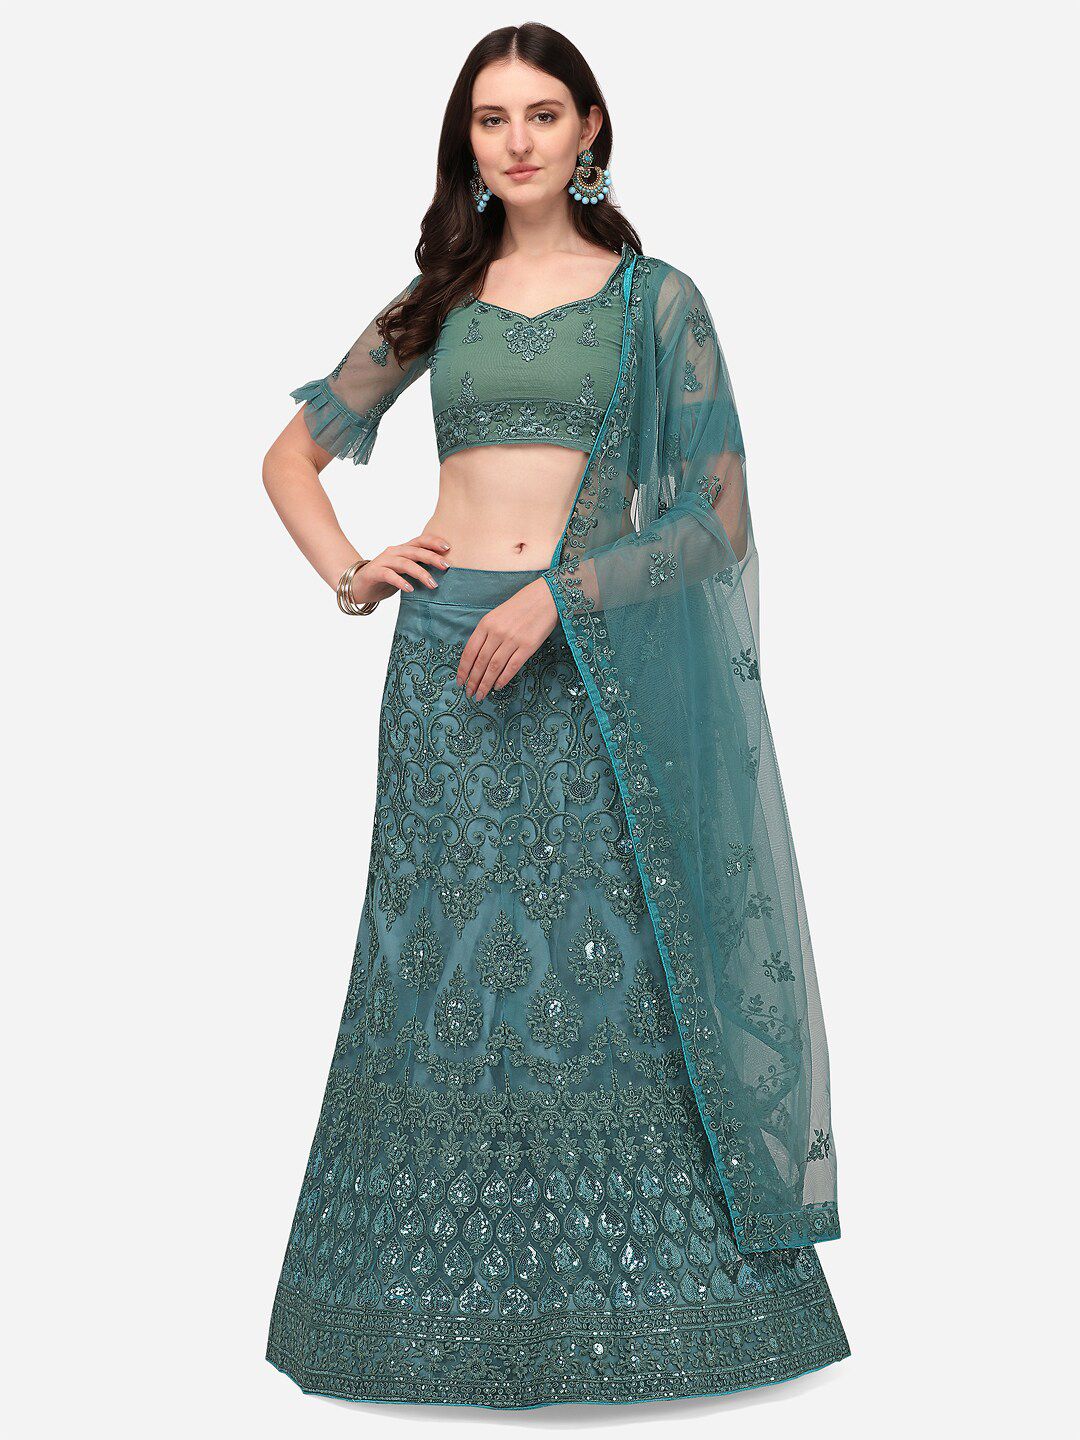 RAJGRANTH Turquoise Blue Embroidered Semi-Stitched Lehenga & Unstitched Blouse With Dupatta Price in India